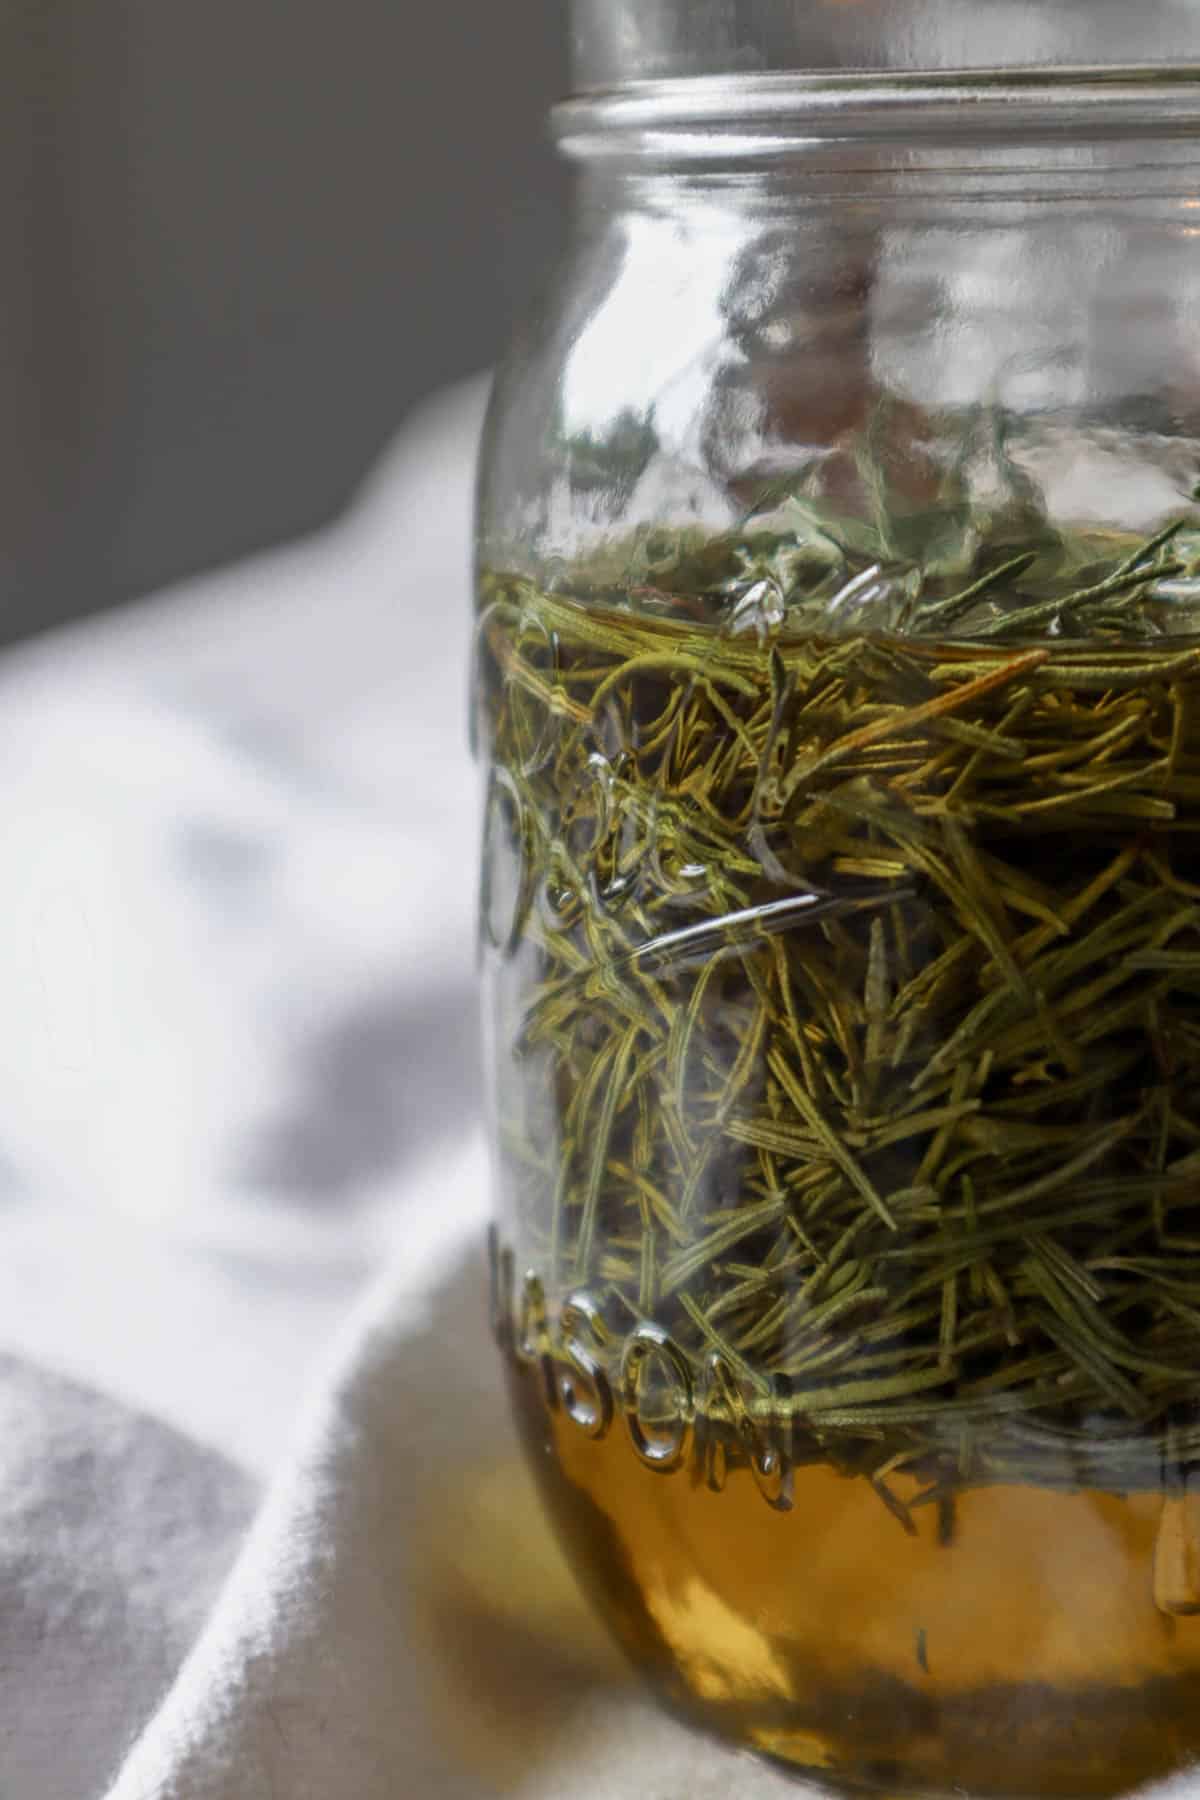 Ball jar of dried rosemary leaves infusing in oil